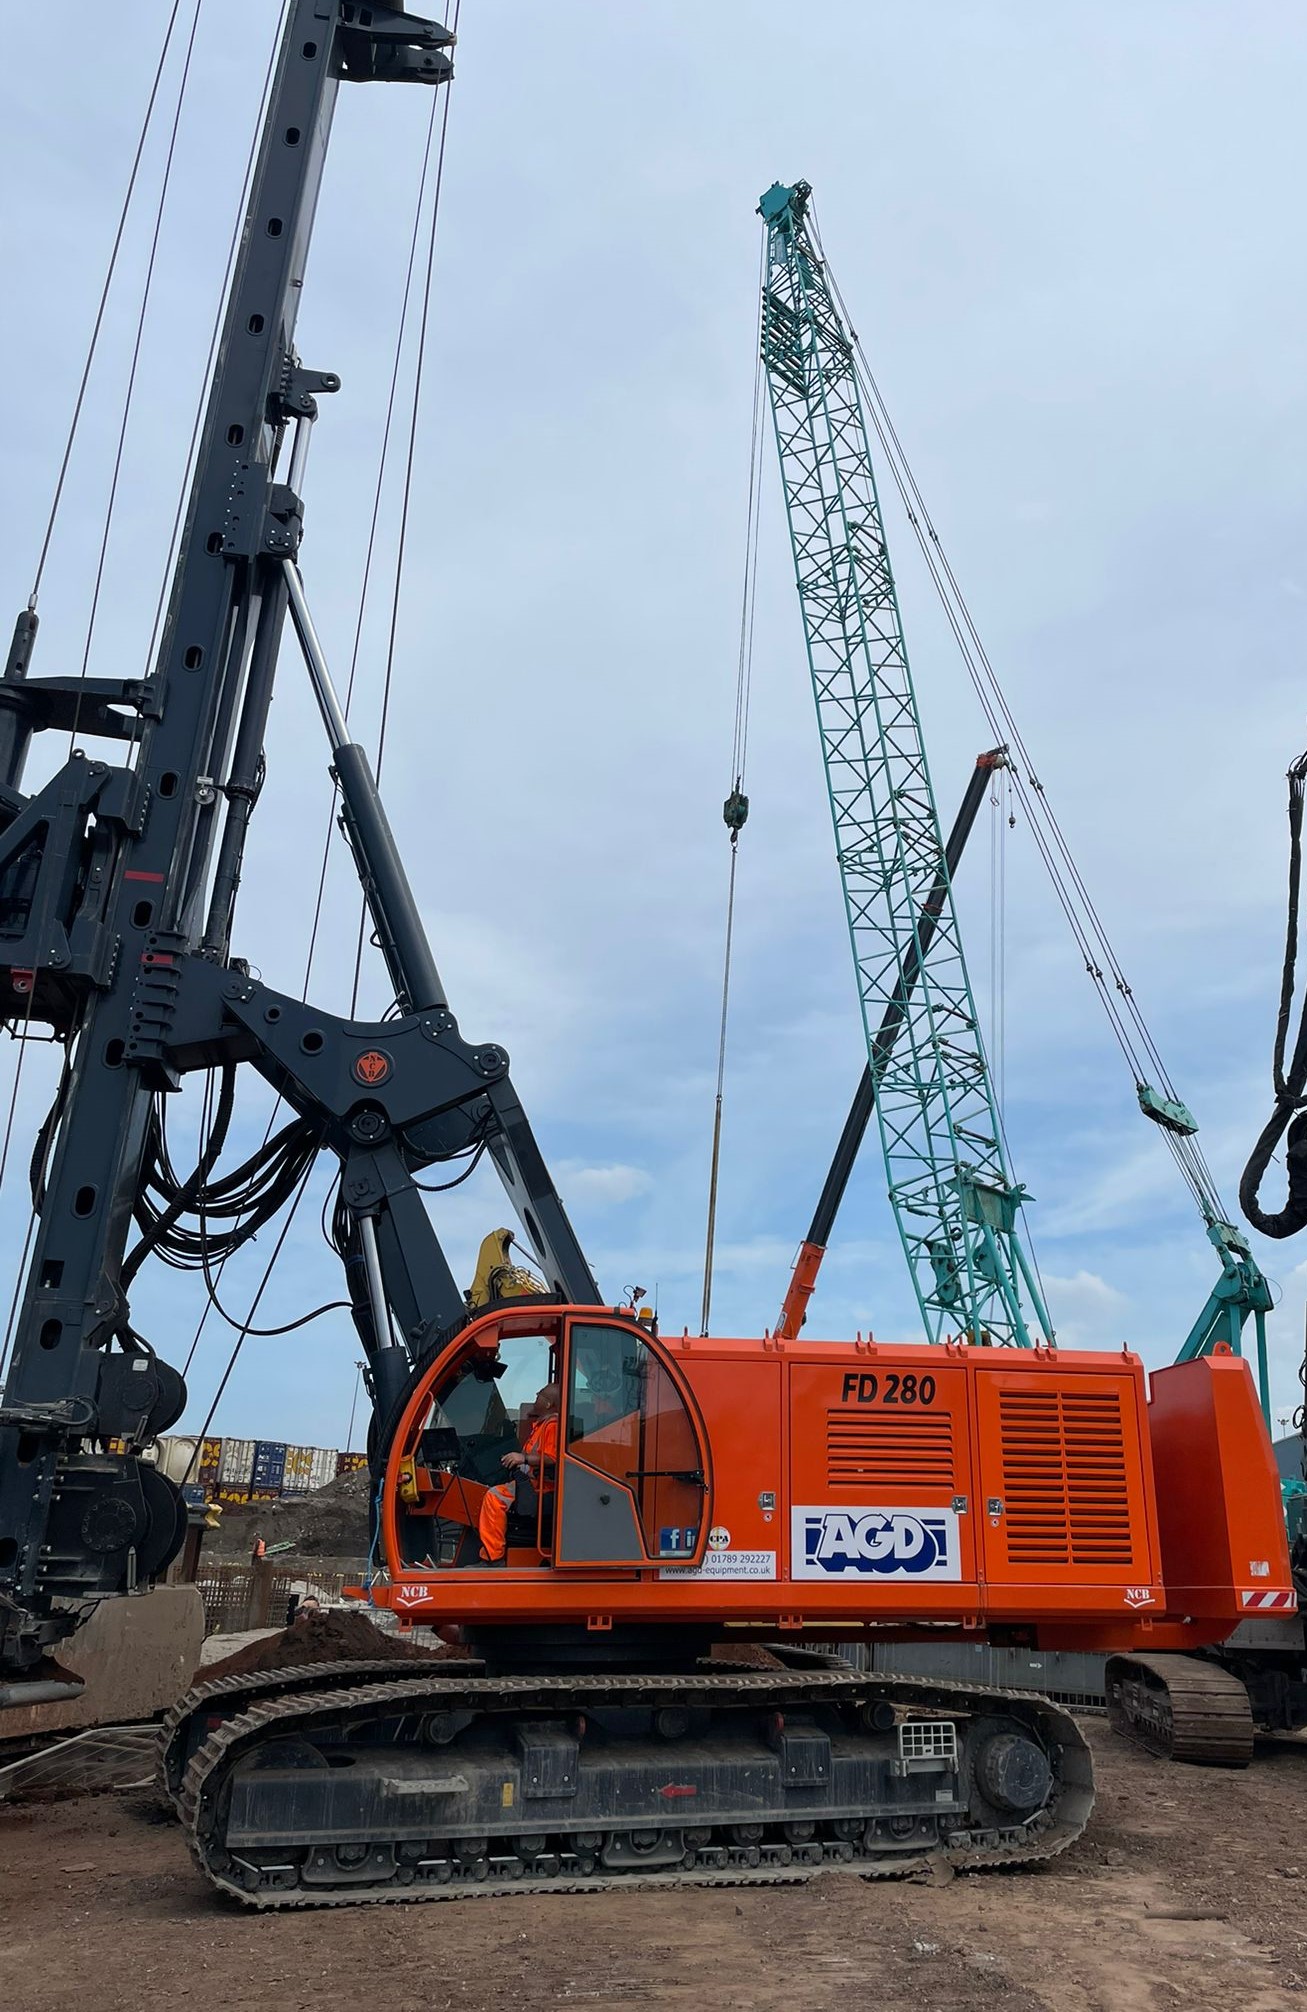 UK Suppliers of High-Capacity Rotary Piling Rig Hire